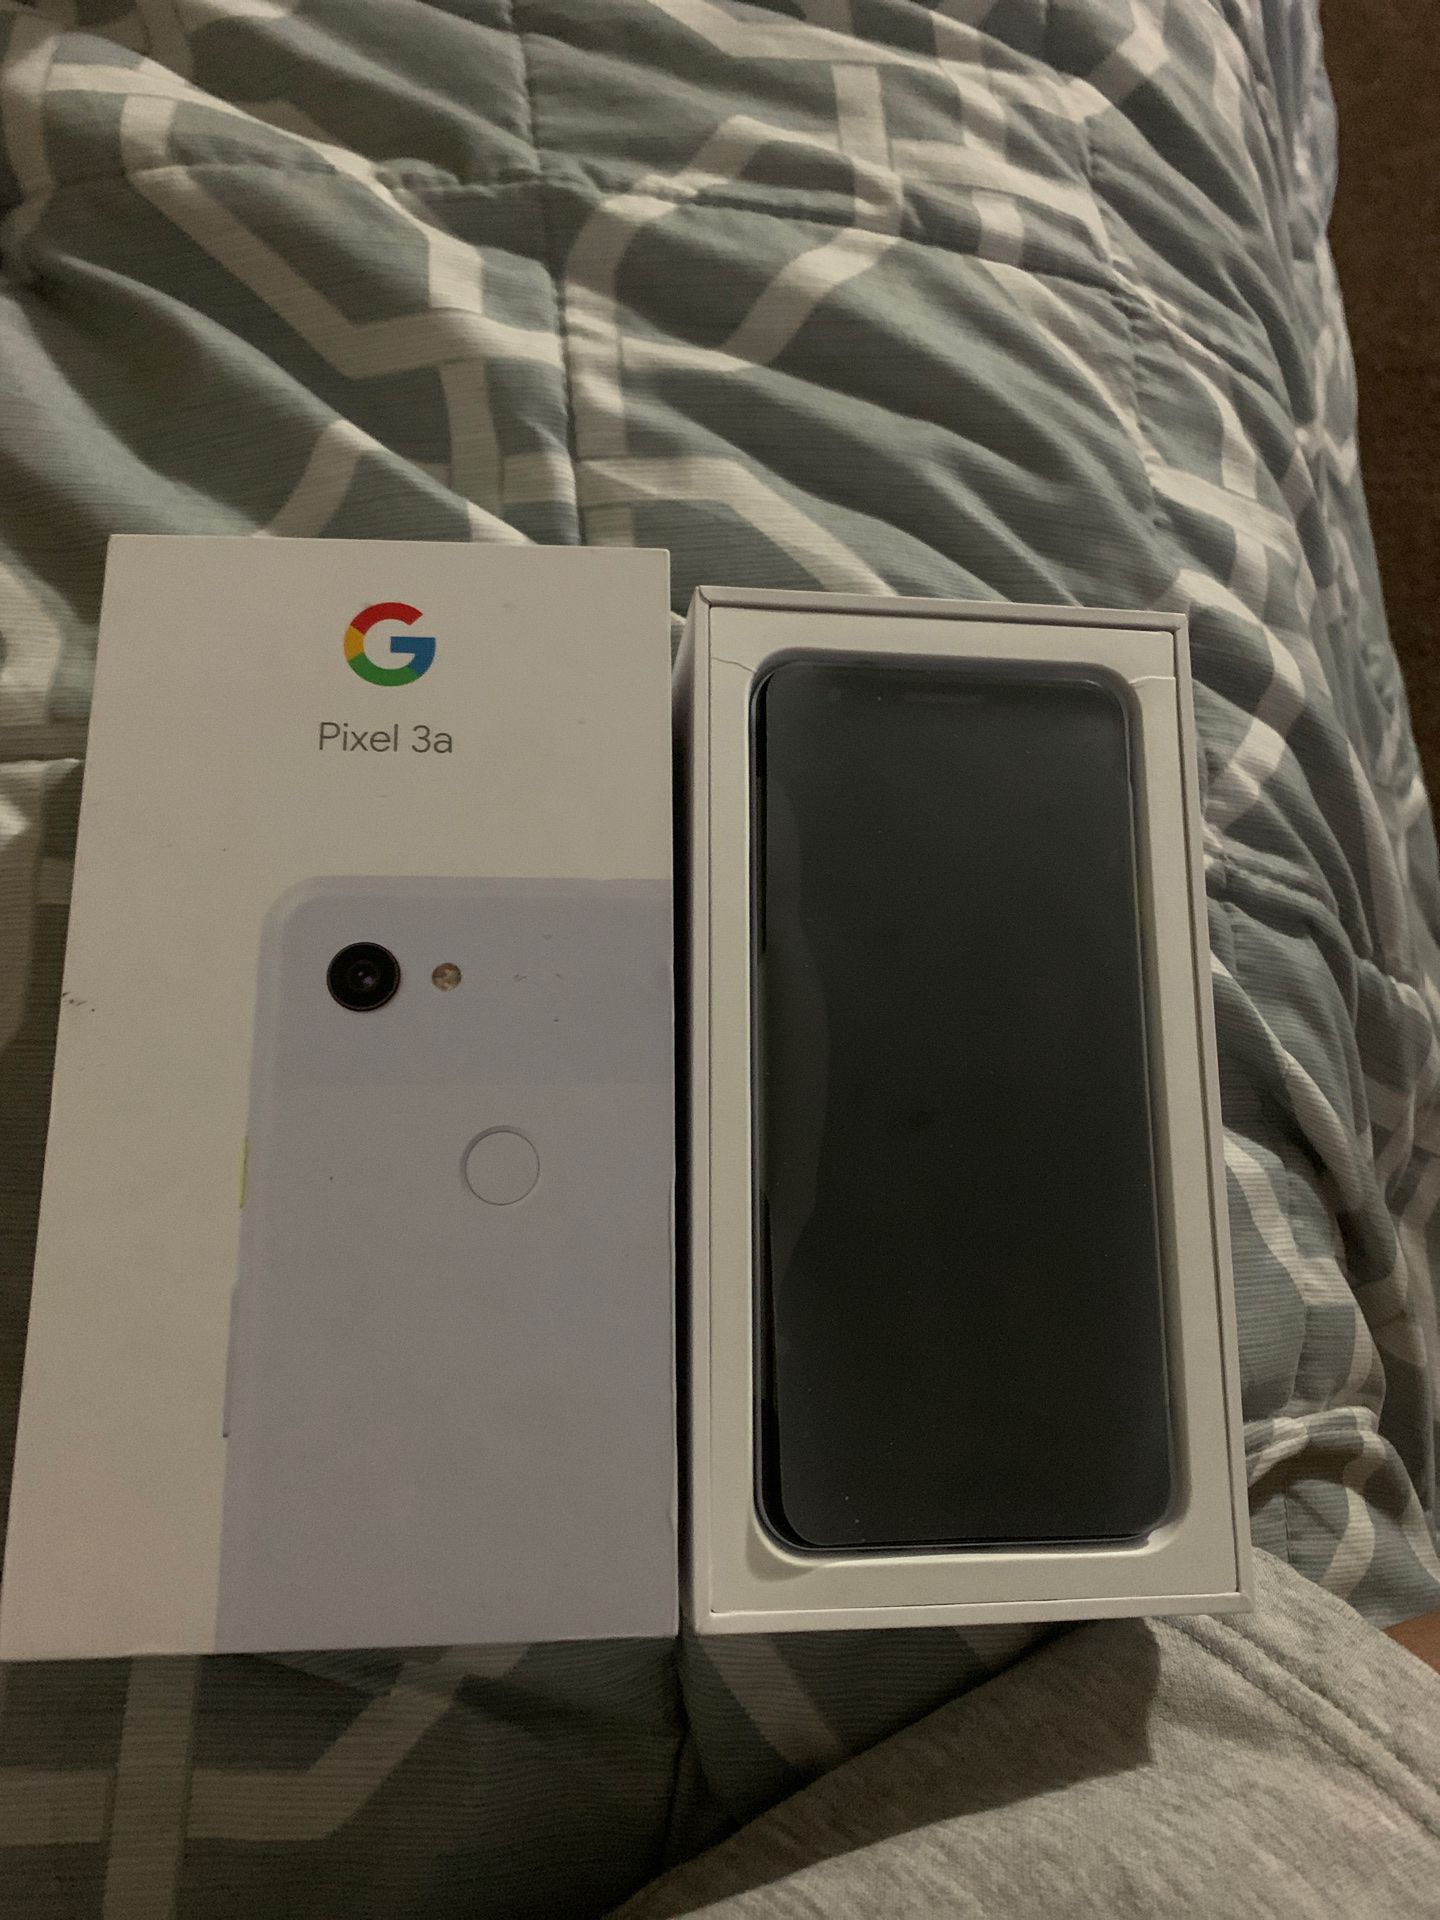 I have a brand new Pixel 3A